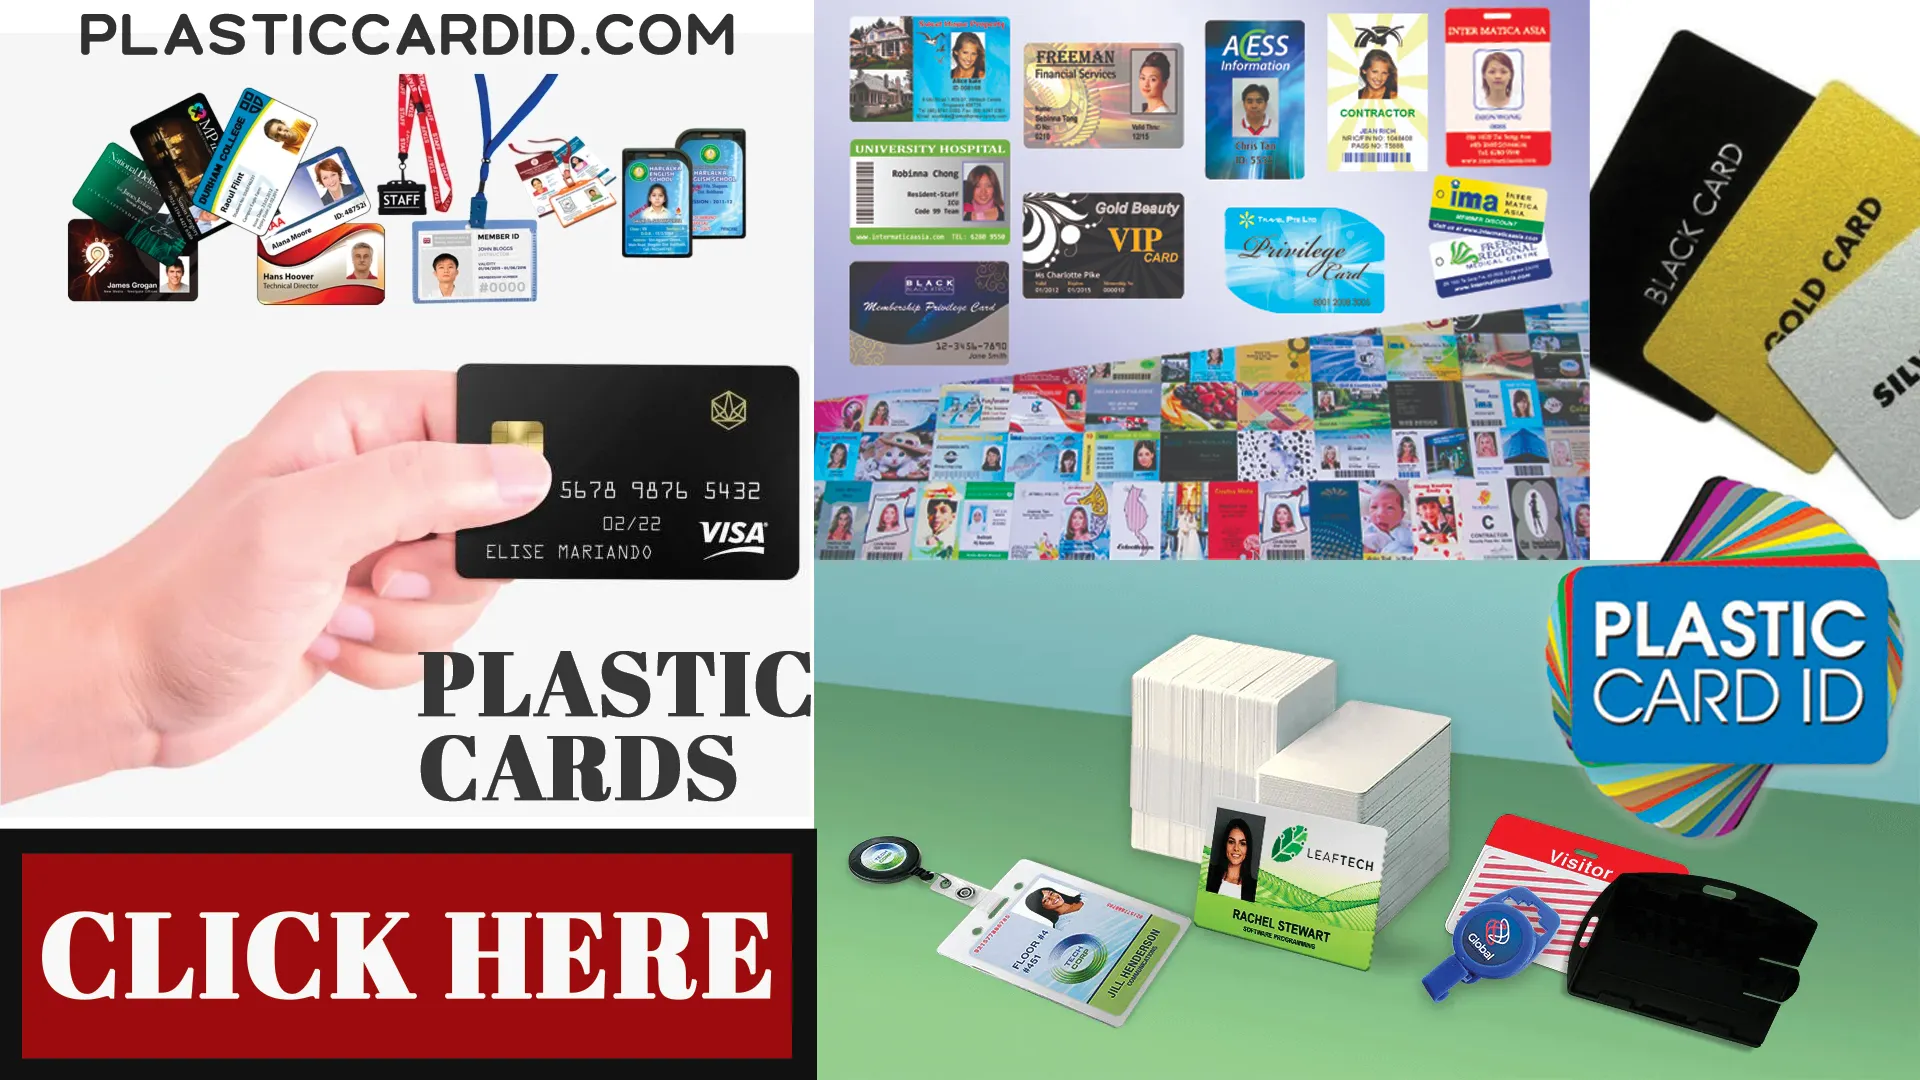 Discover the Range of Our Plastic Card Products